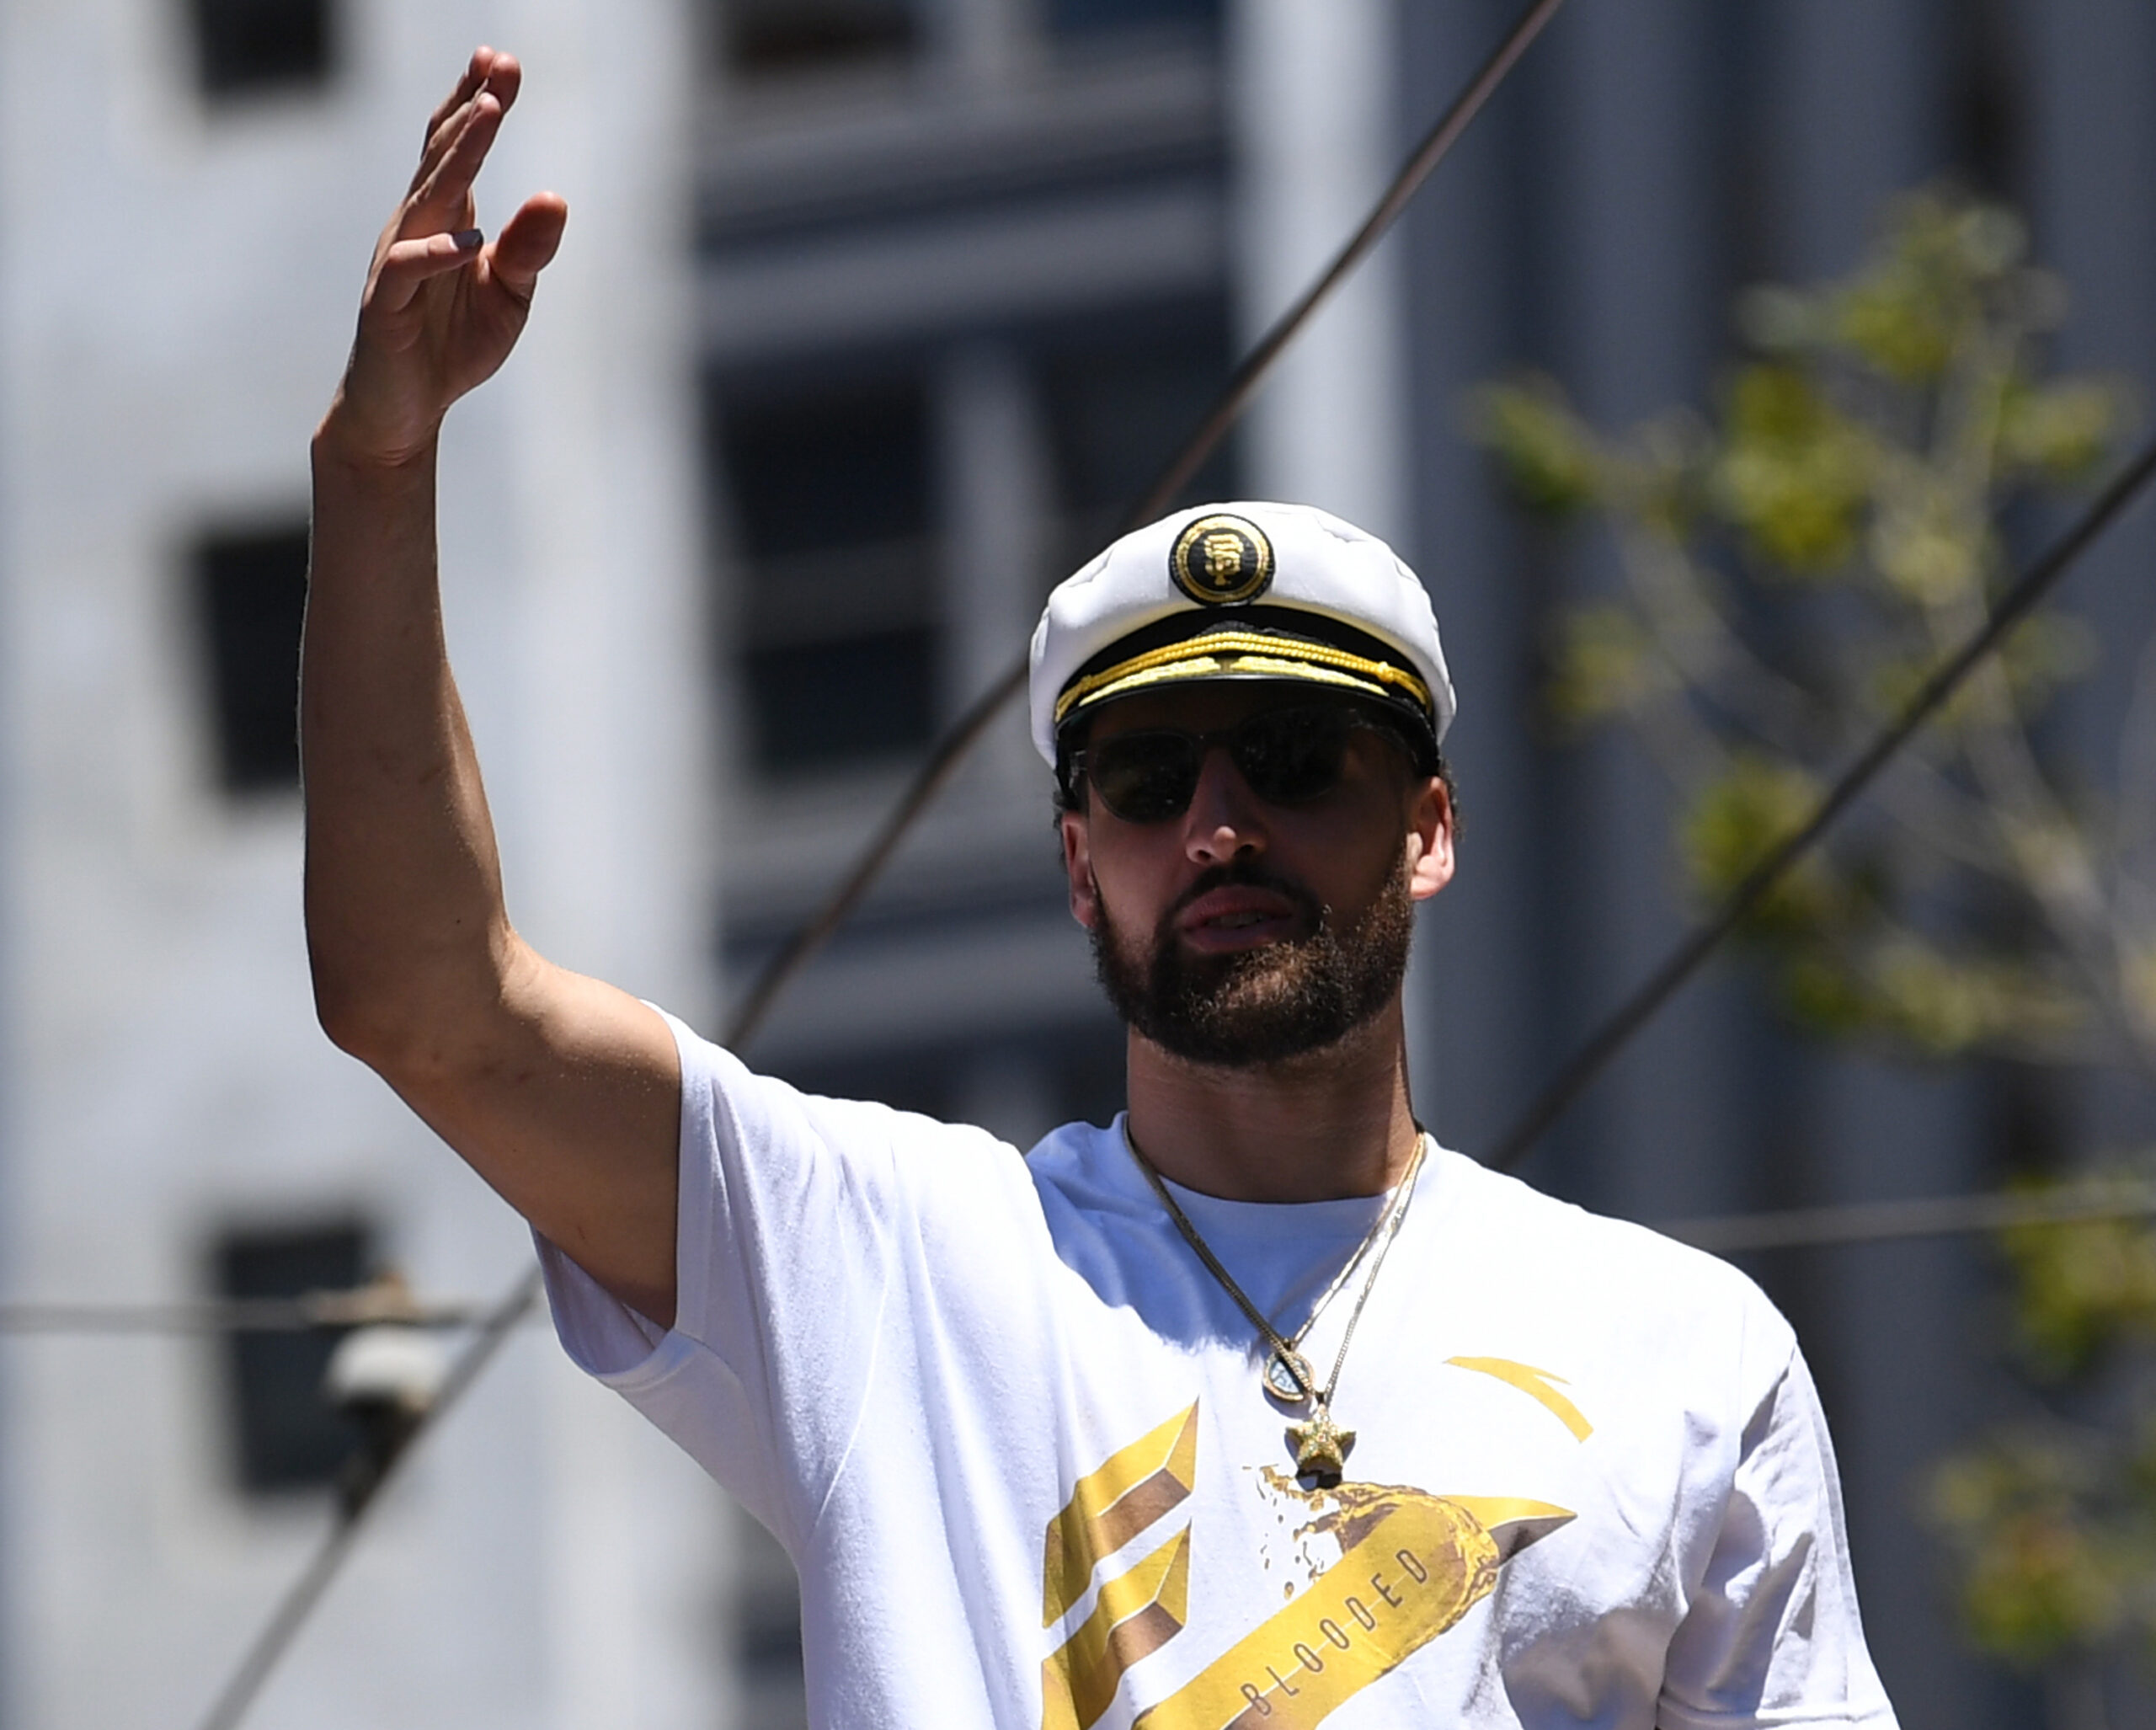 If the Warriors’ Dynasty Is Over, There’s No Need To Mourn